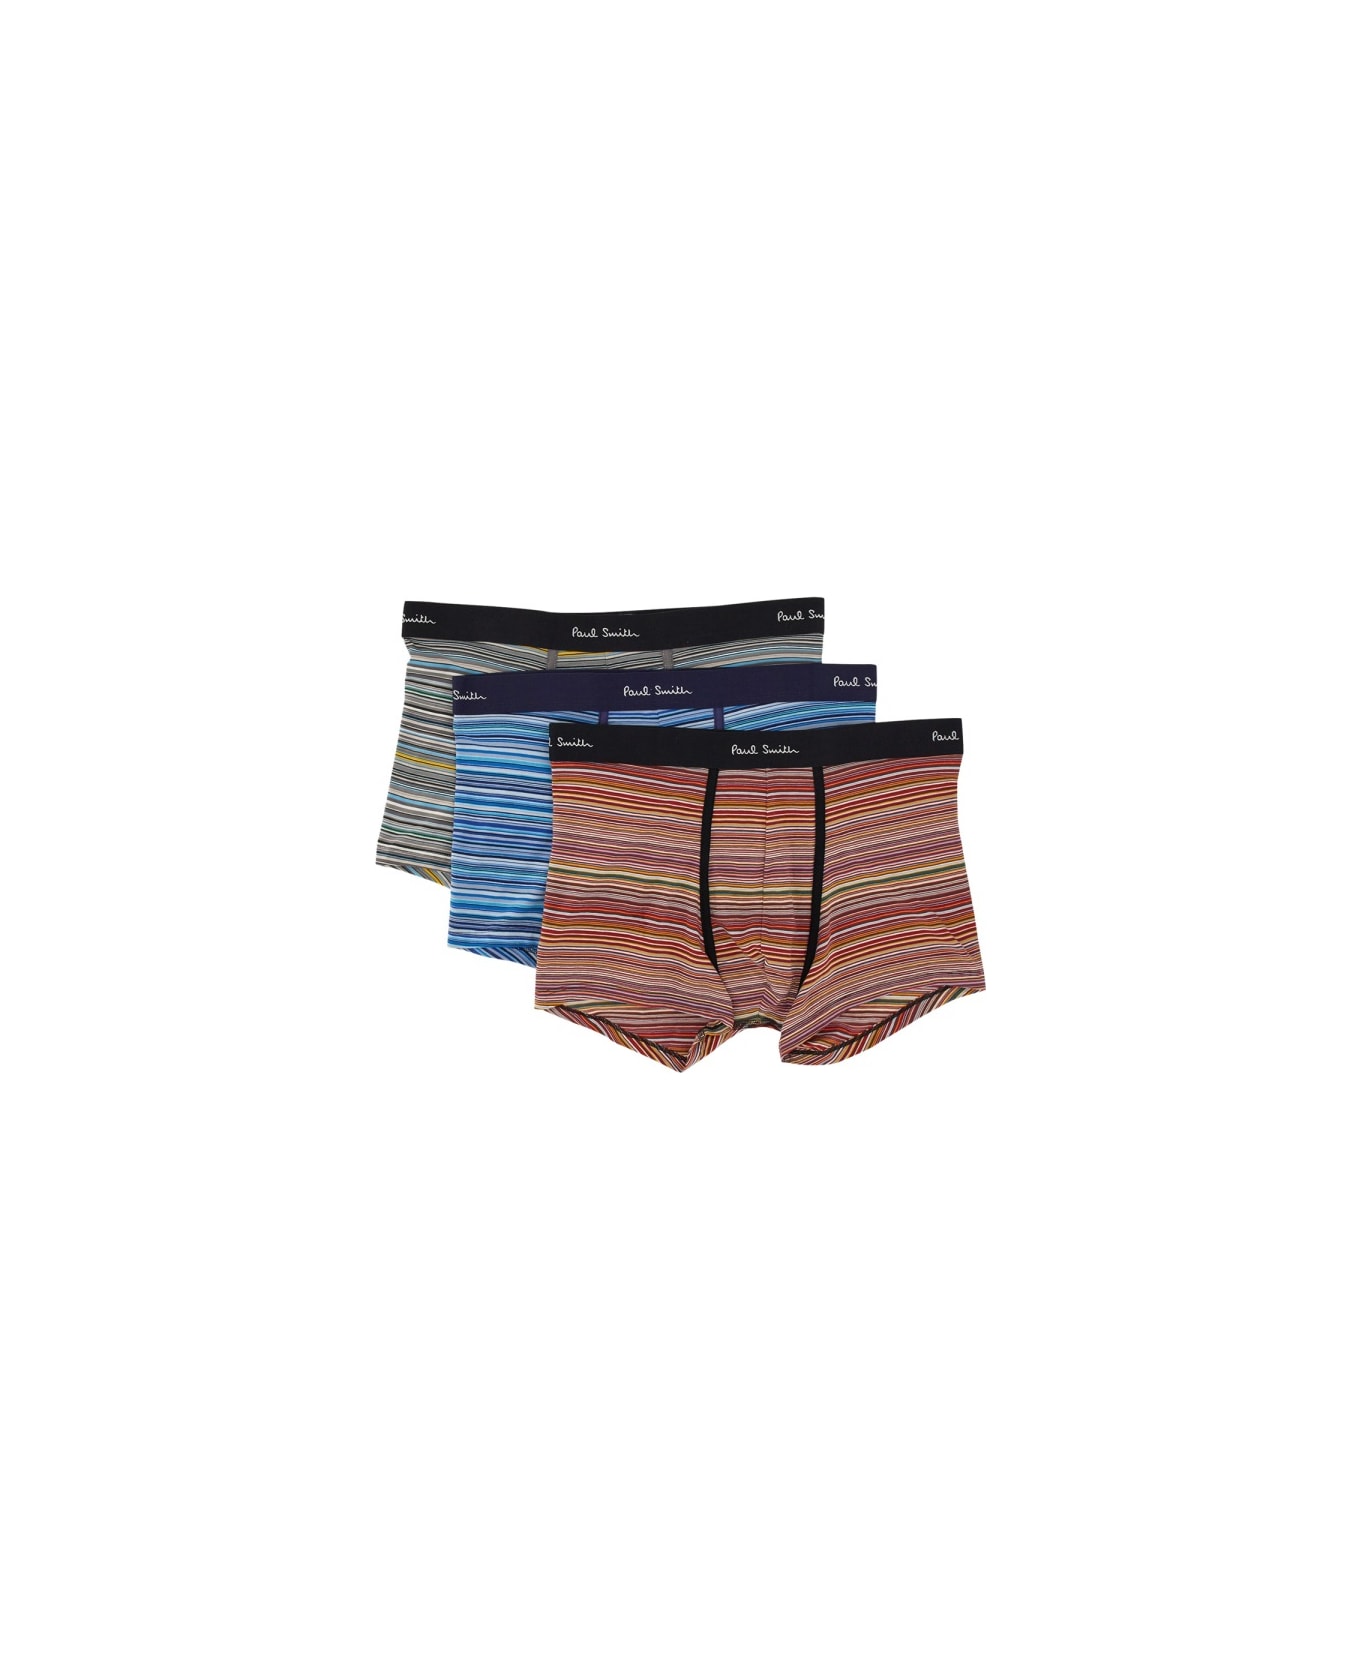 Paul Smith Pack Of Three Boxers - BLUE/RED ショーツ